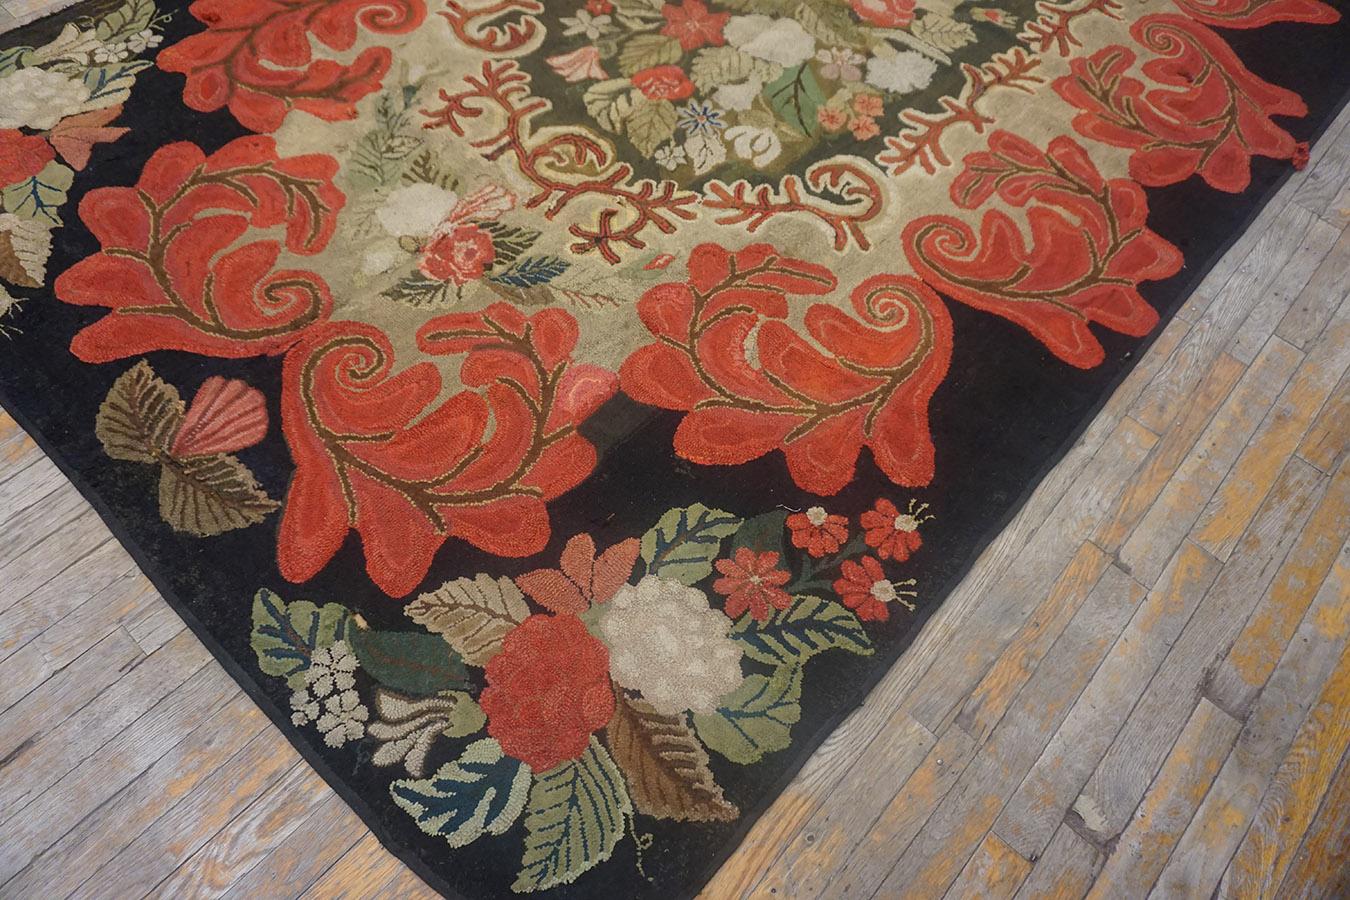 Hand-Woven 19th Century American Hooked Rug ( 6'2